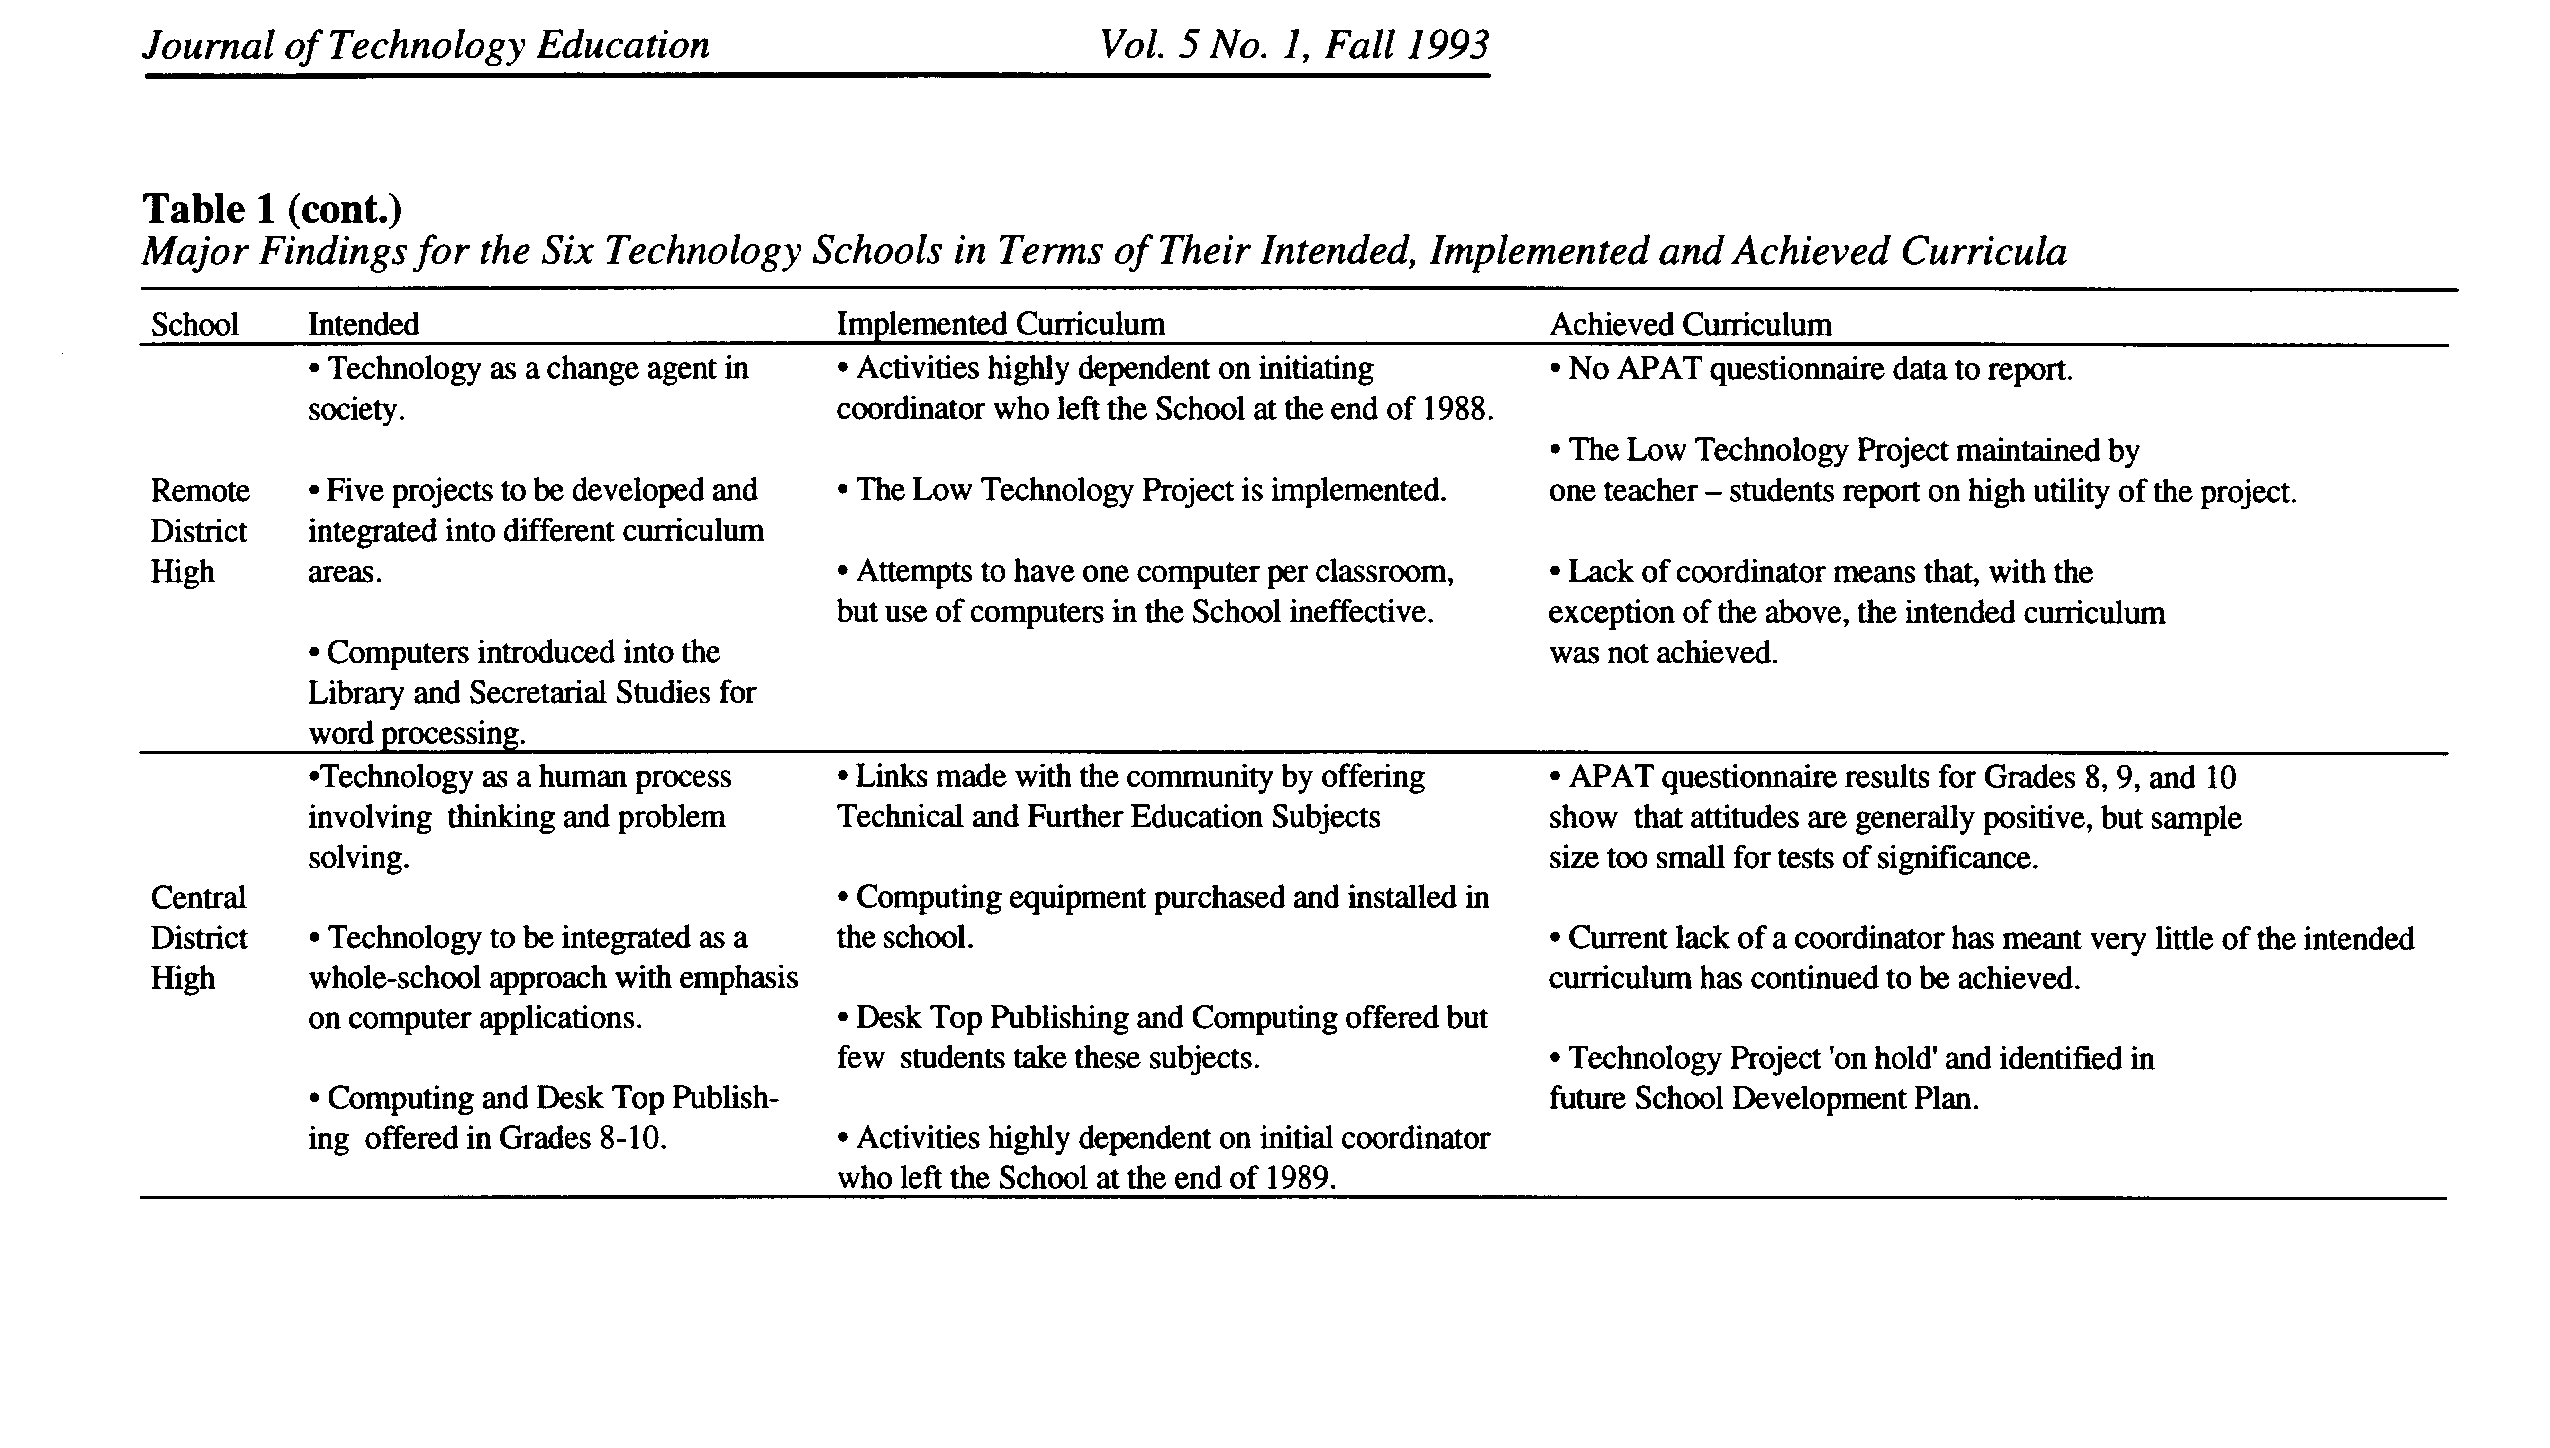 Table 1 part 3. Major Findings for the Six Technology Schools in Terms of Their Intended, Implemented and Achieved Curricula